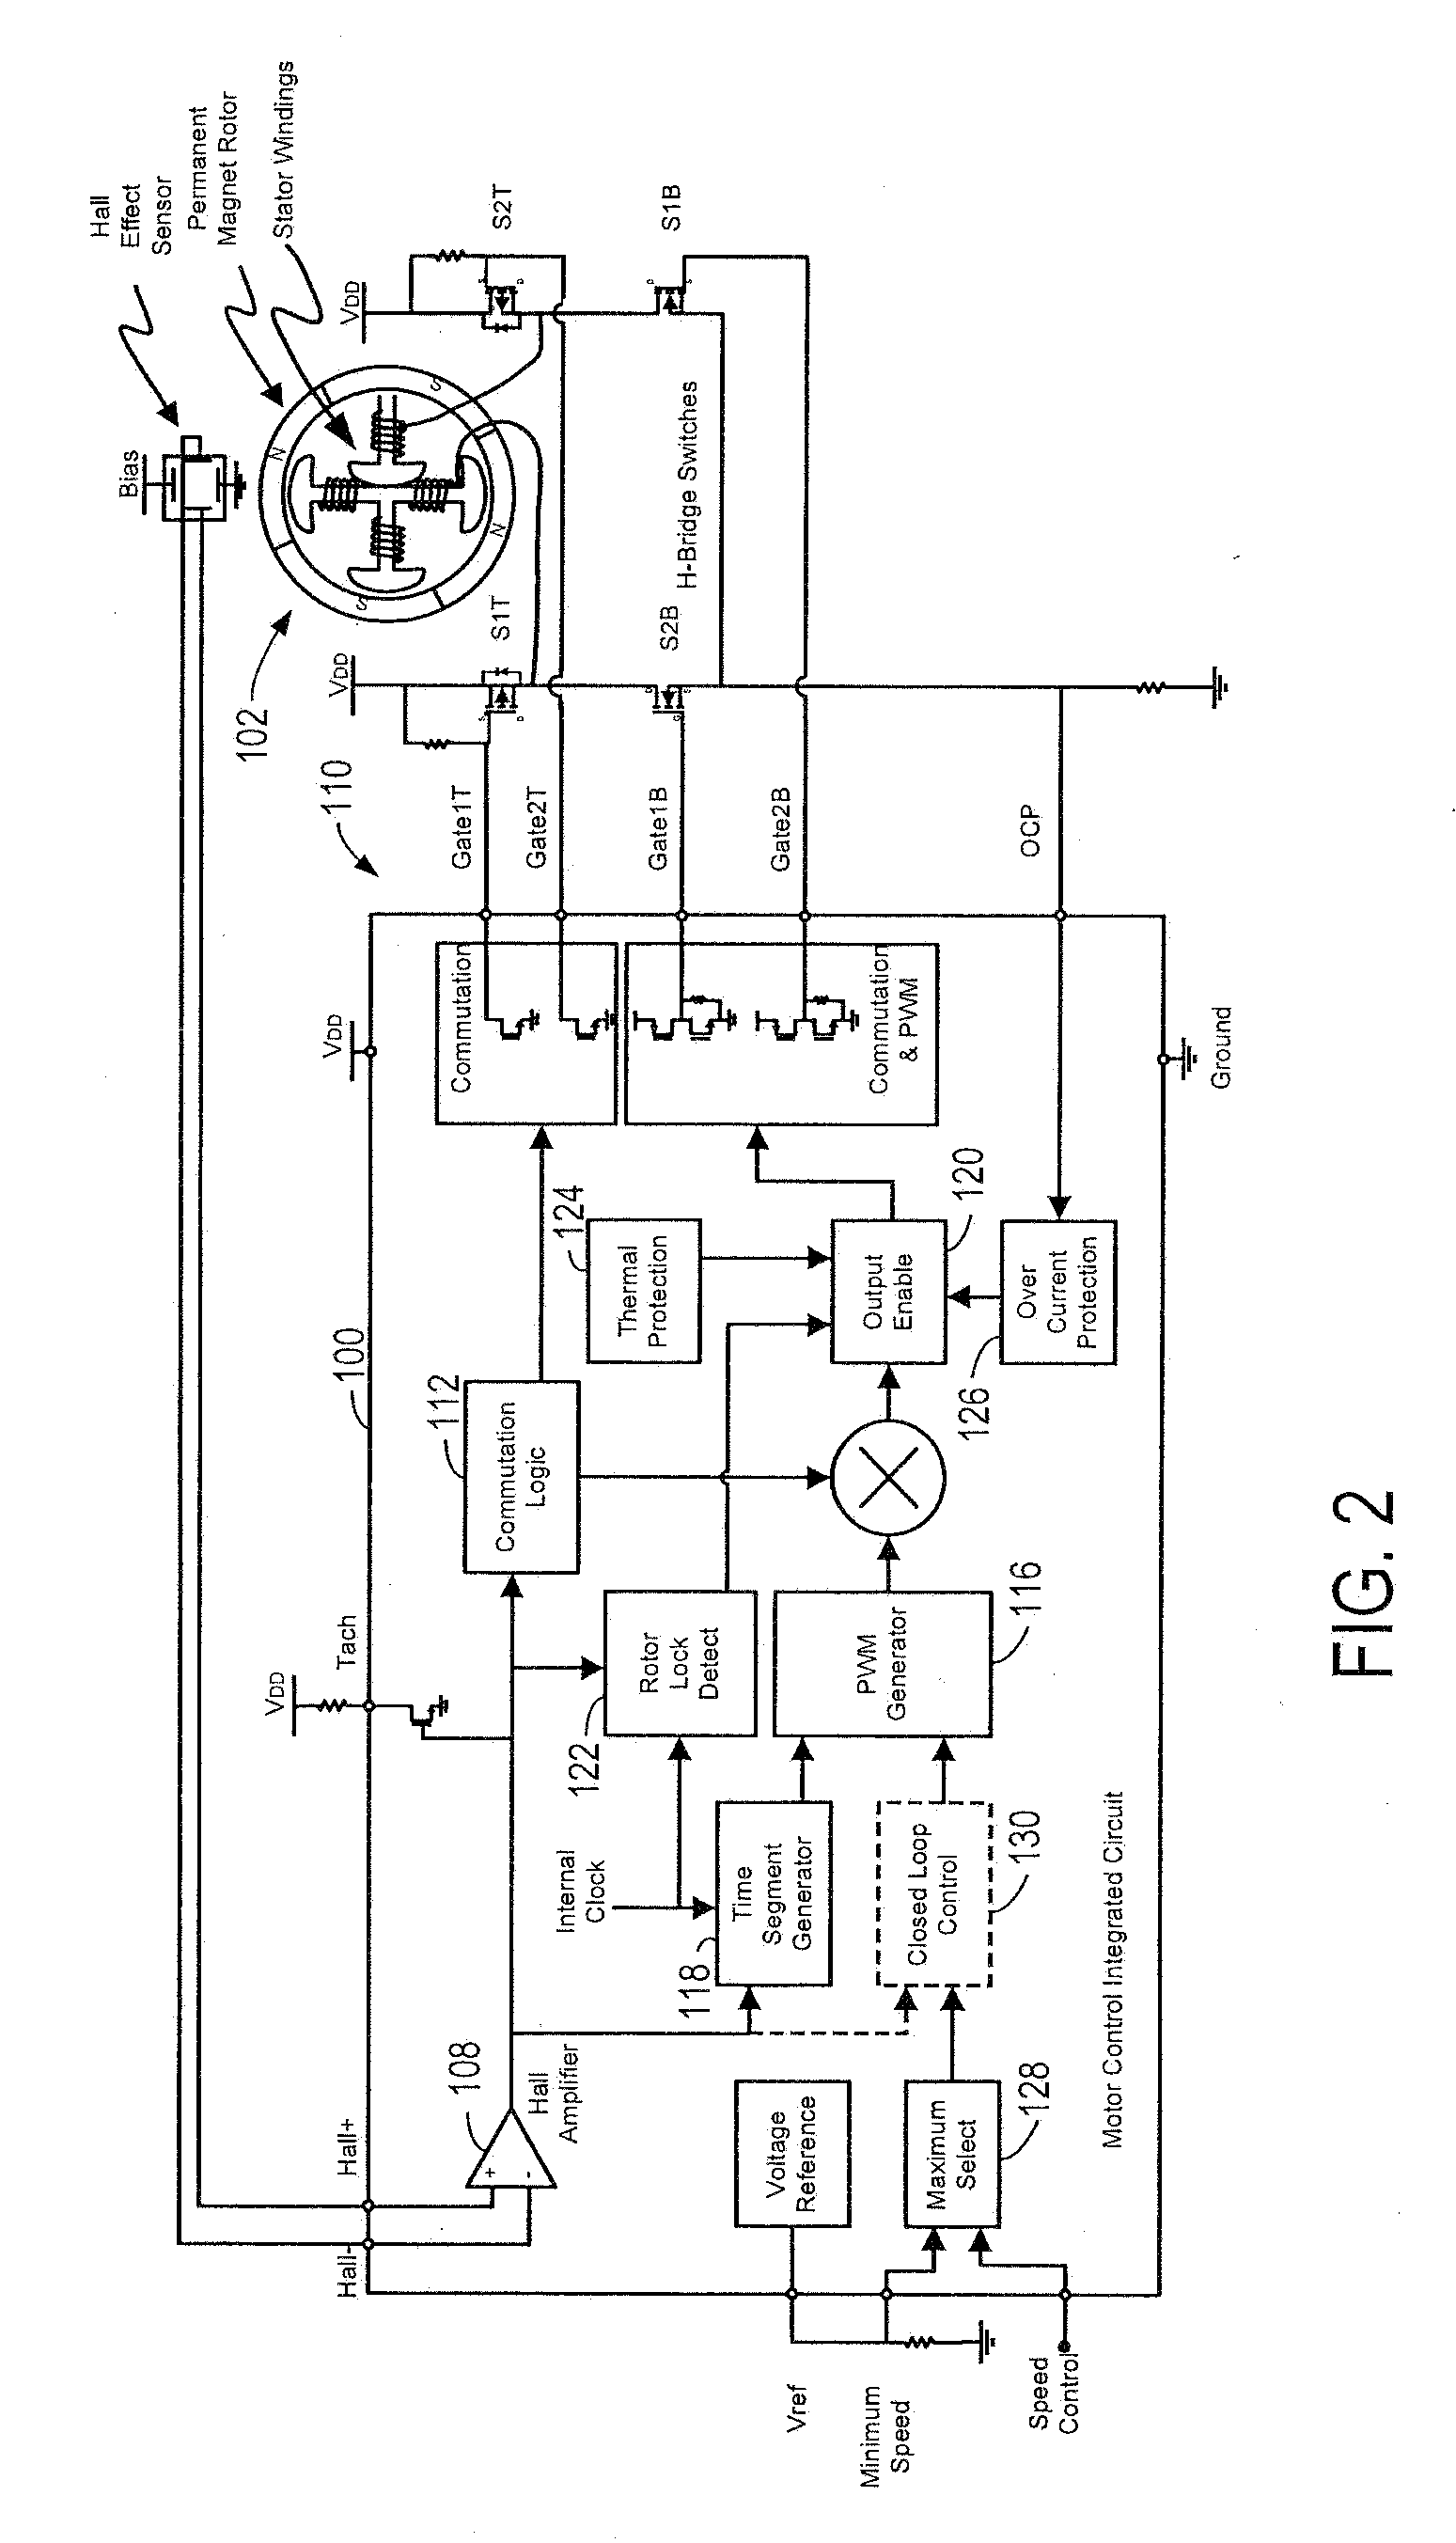 Position Corrected Pulse Width Modulation for Brushless Direct Current Motors